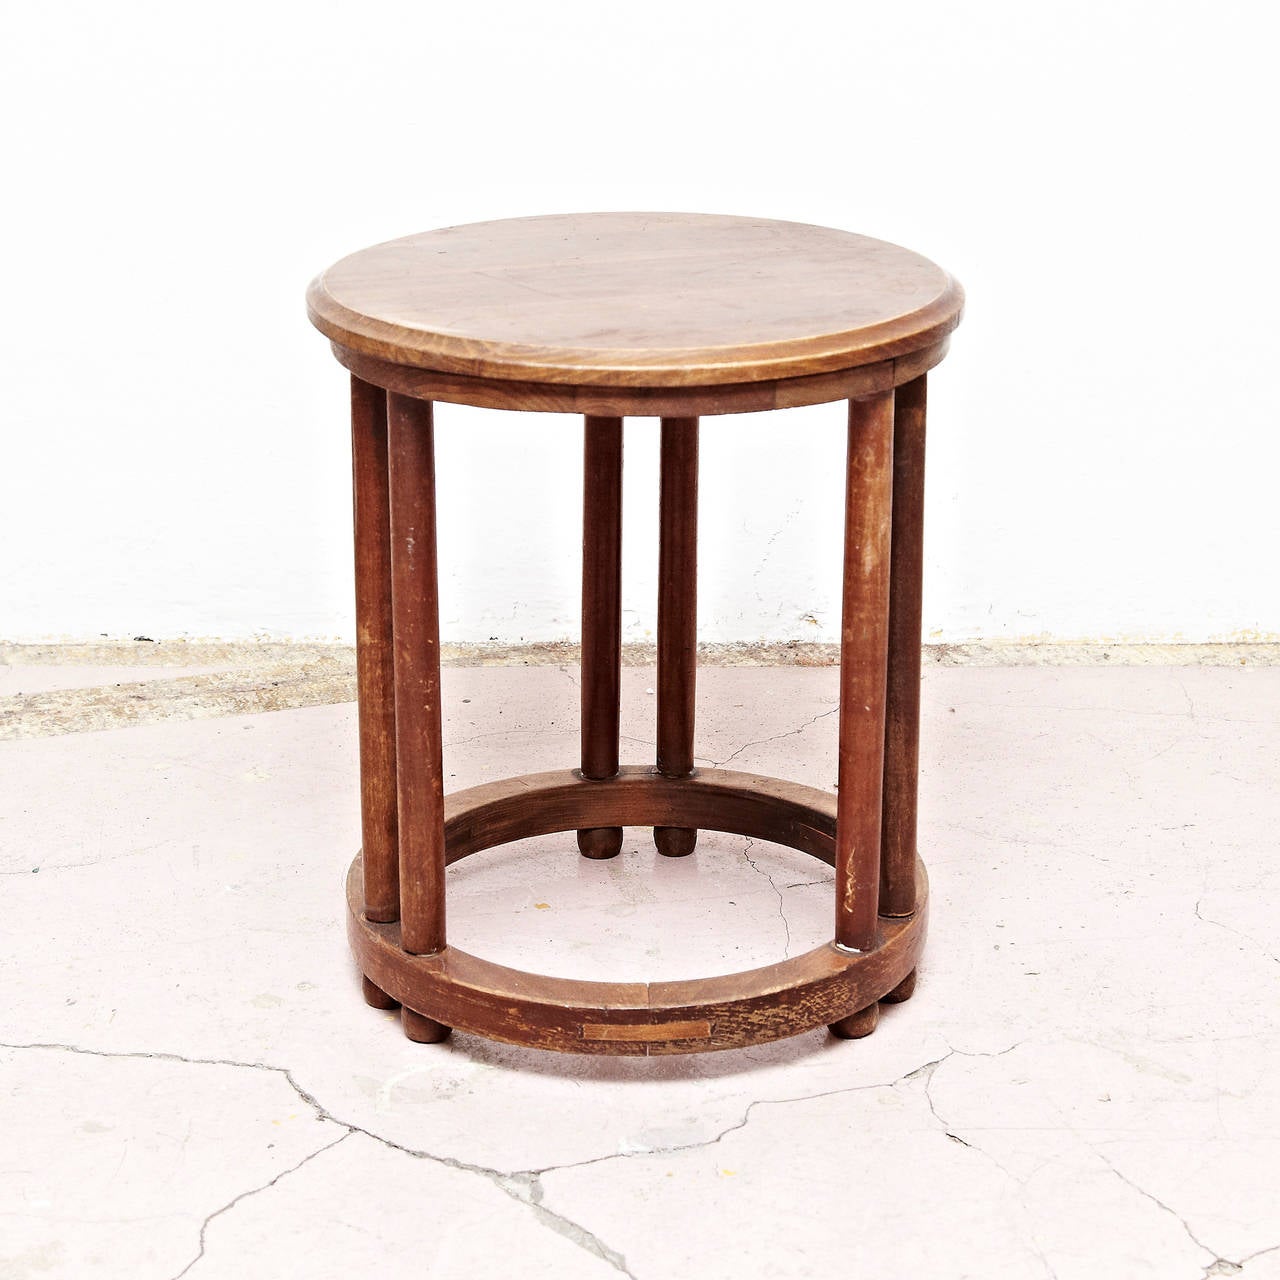 Josef Hoffmann Stool, circa 1900, Austria

In great original condition, with minor wear consistent with age and use, preserving a beautiful patina.

Josef Hoffmann (December 15, 1870 – May 7, 1956) was an Austrian architect and designer of